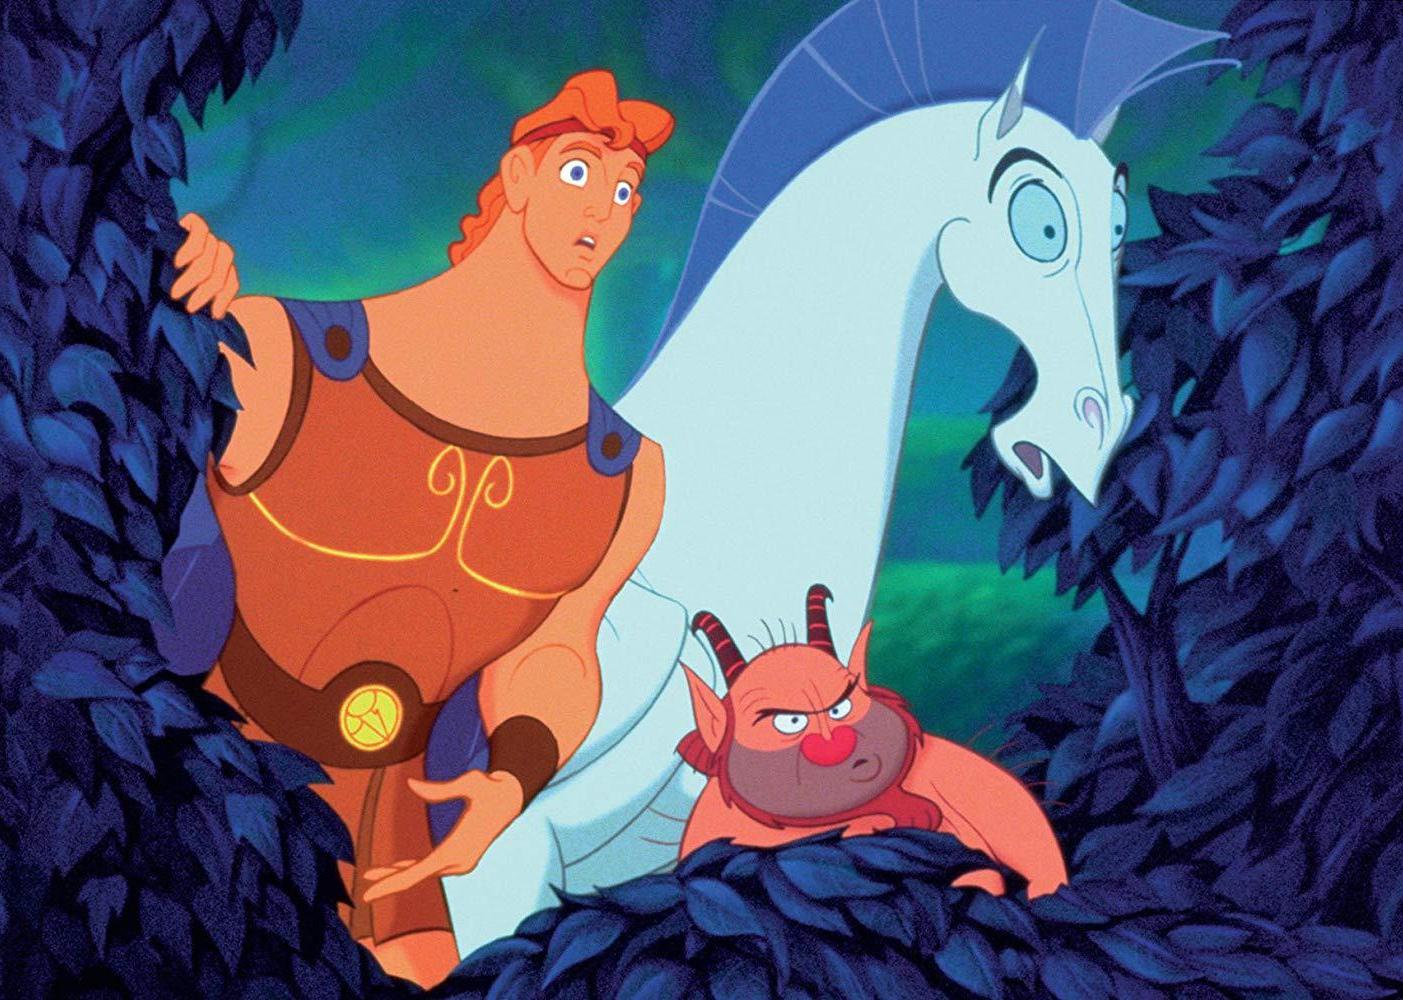 A cartoon of a man in armor, a small creature and a horse peeking out of the bushes.